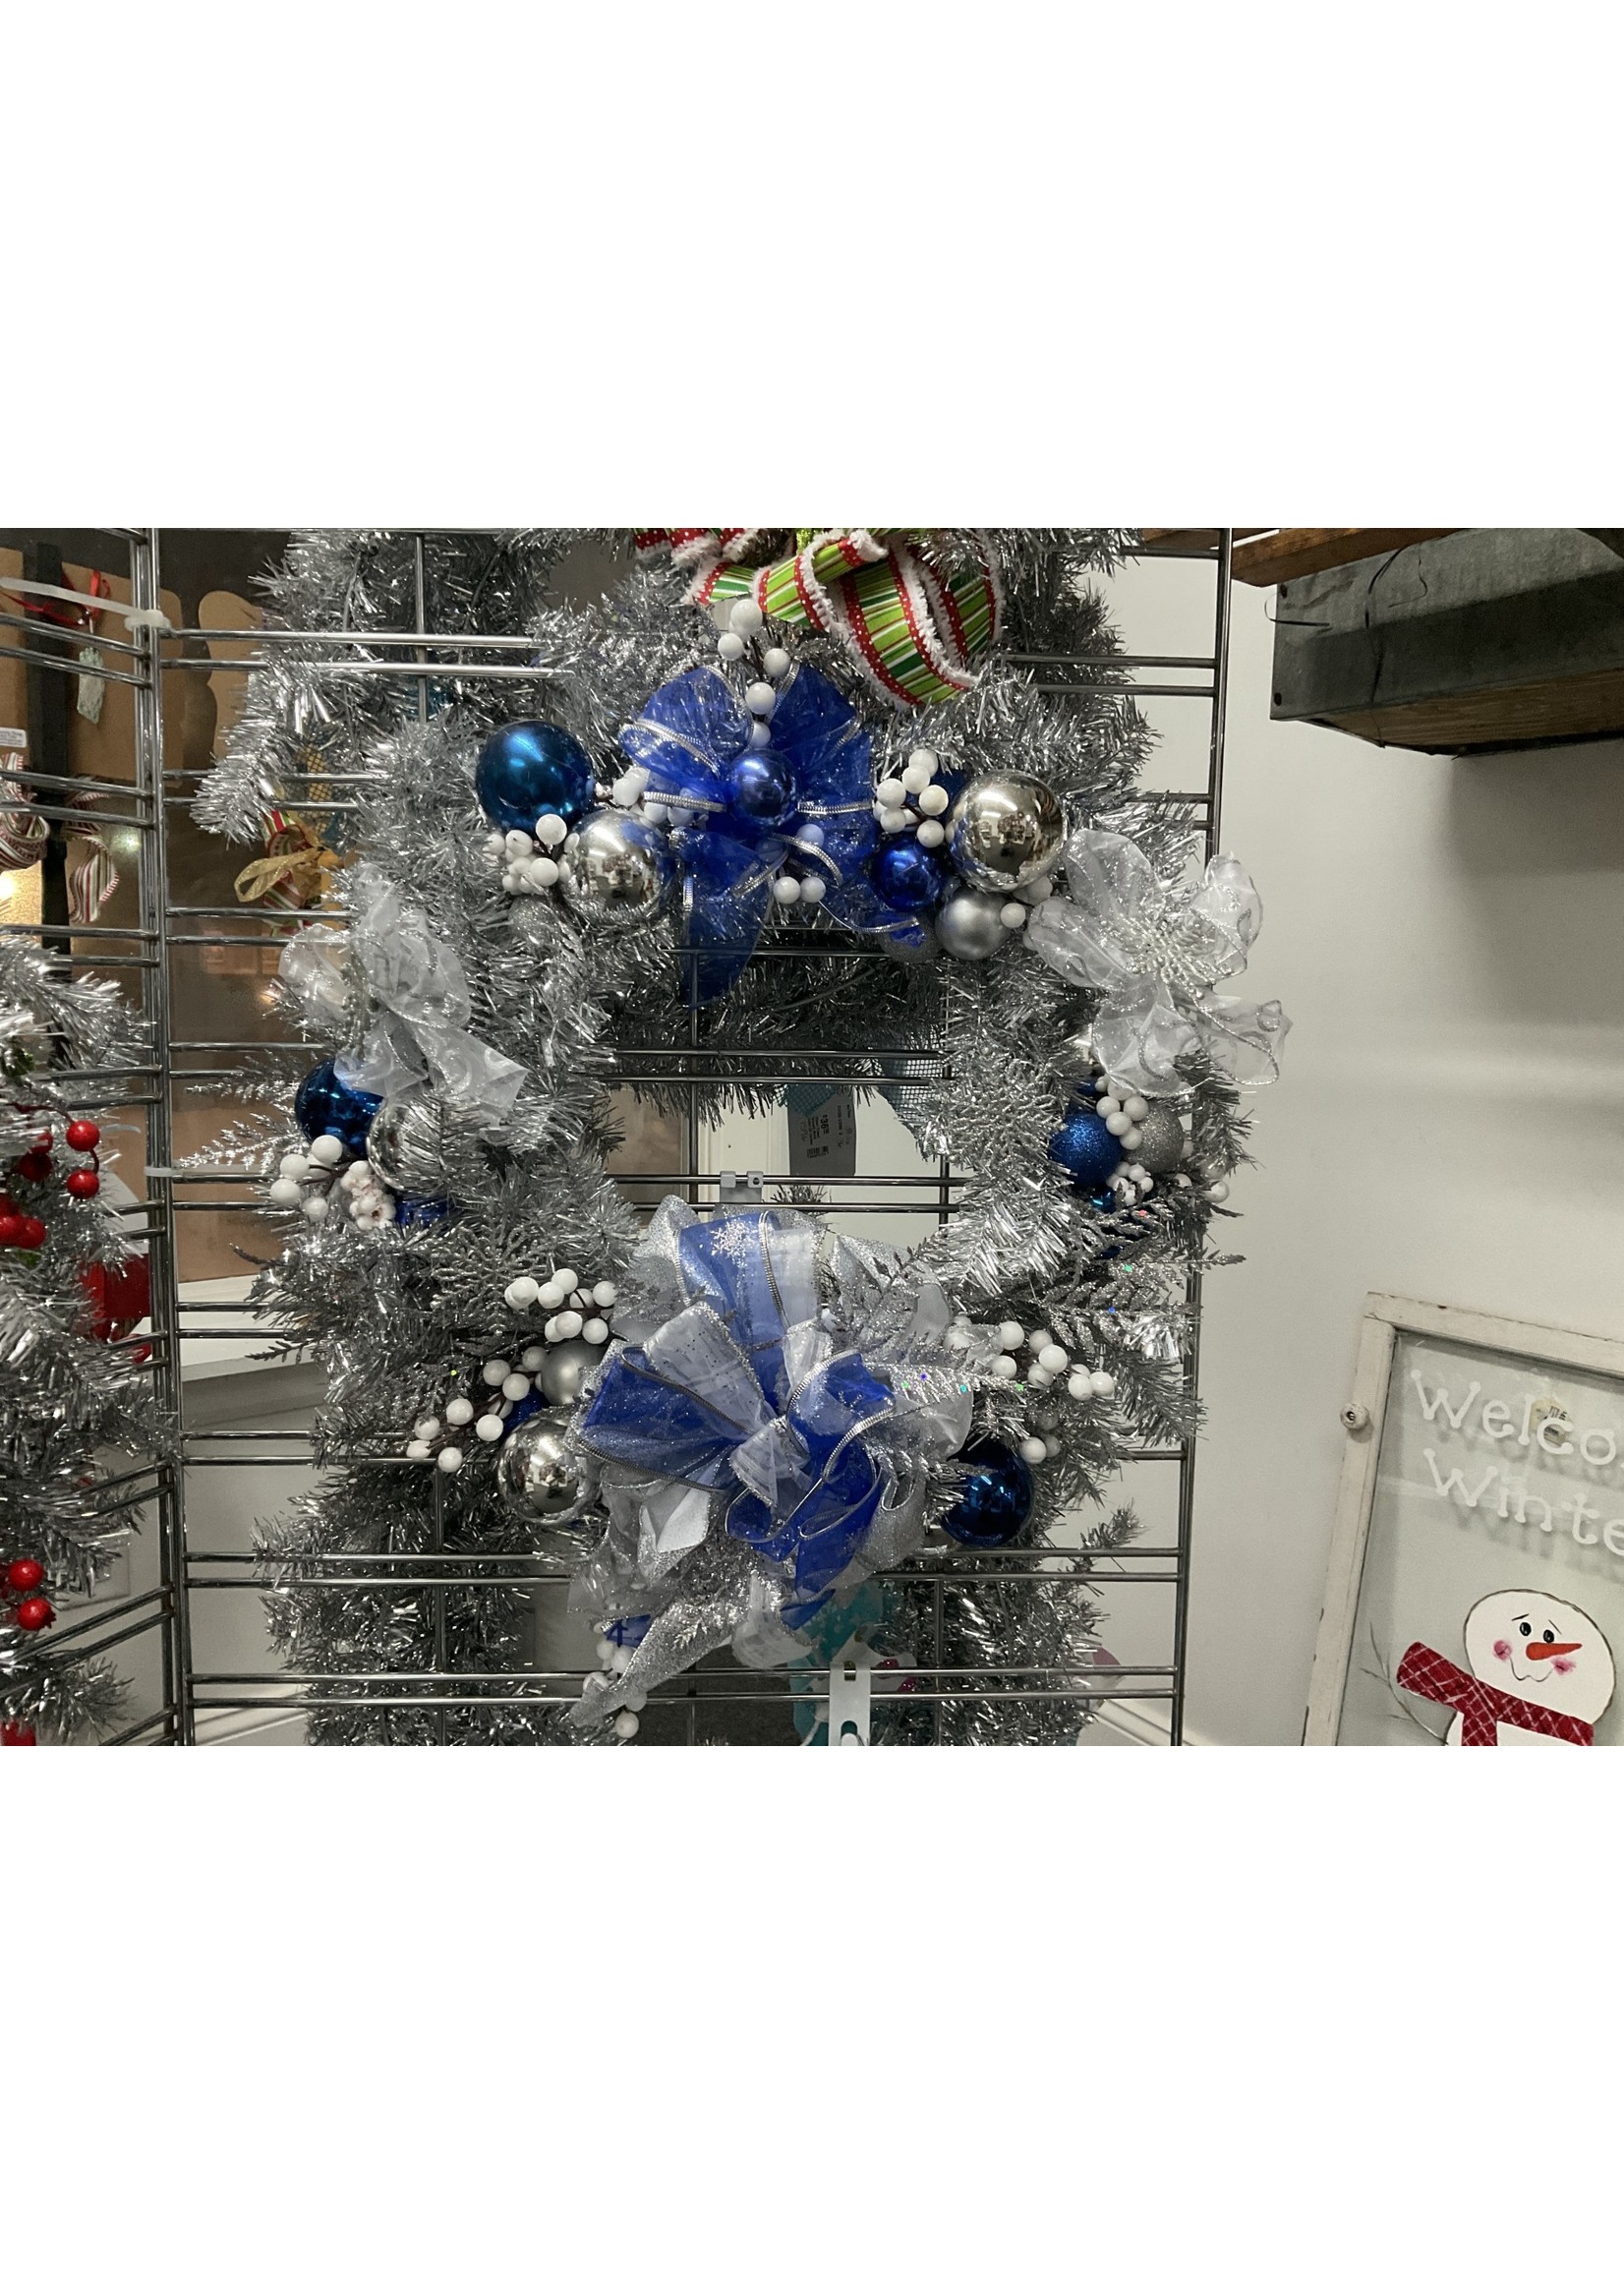 My New Favorite Thing Wreath Tinsel Silver w/Blue Ornaments, Bells and Blue Ribbon